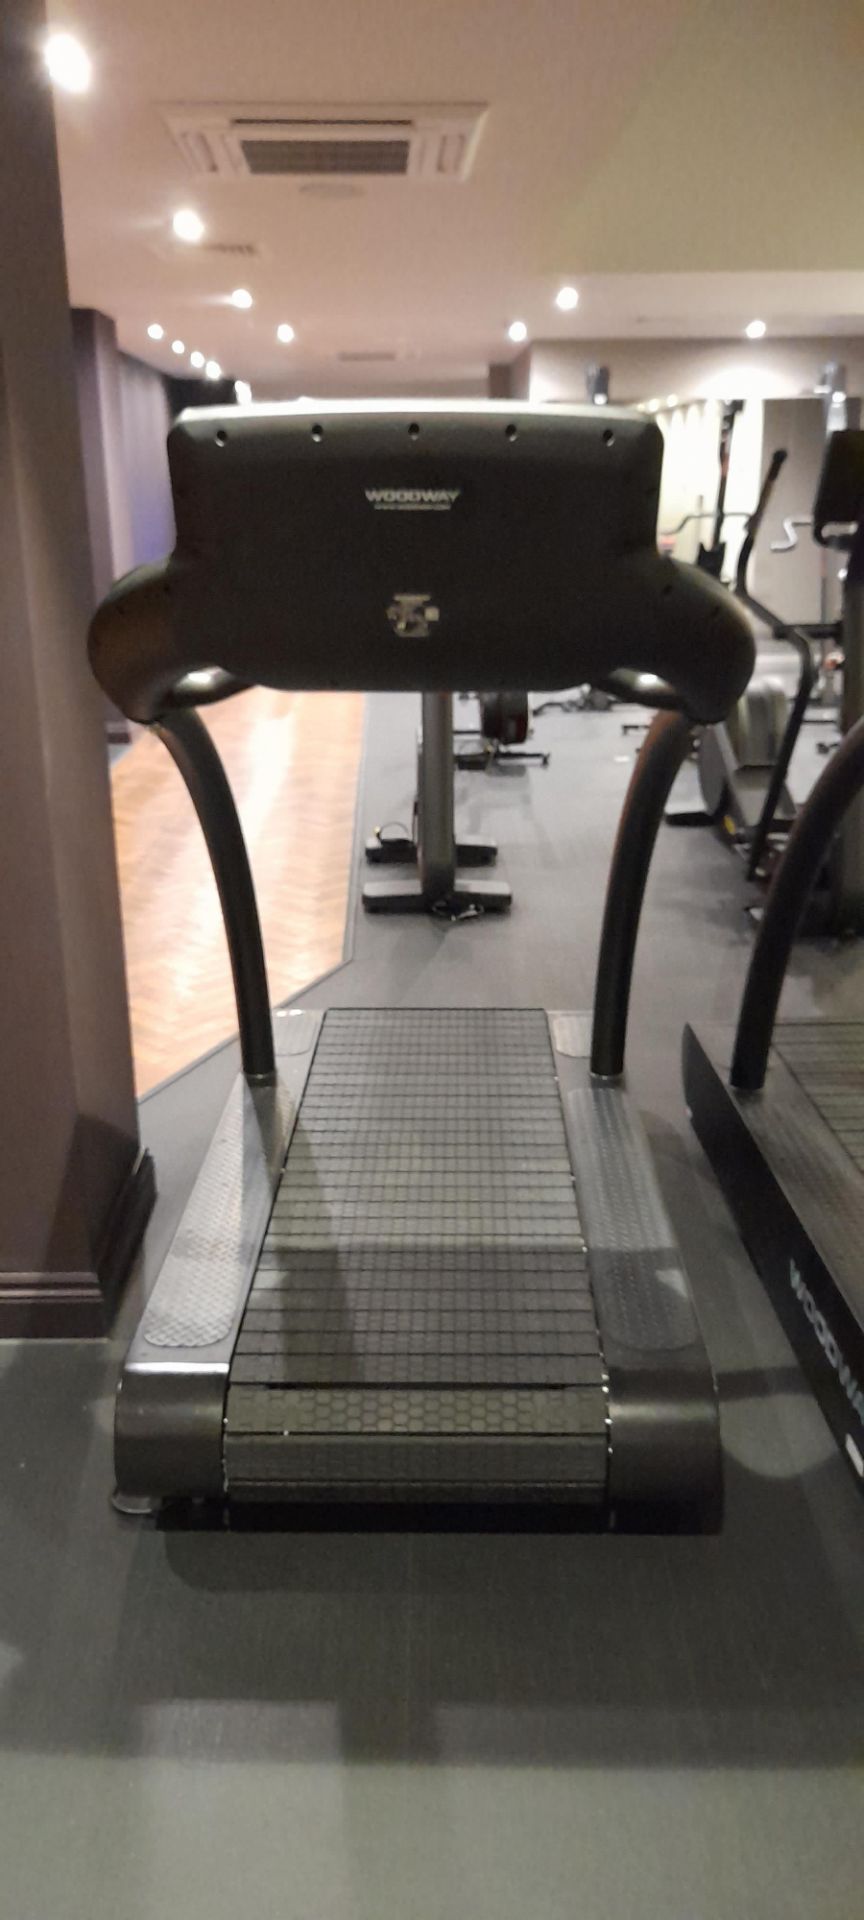 Woodway 4 front slatted belt commercial fitness treadmill Serial number 558100620 - Image 5 of 5